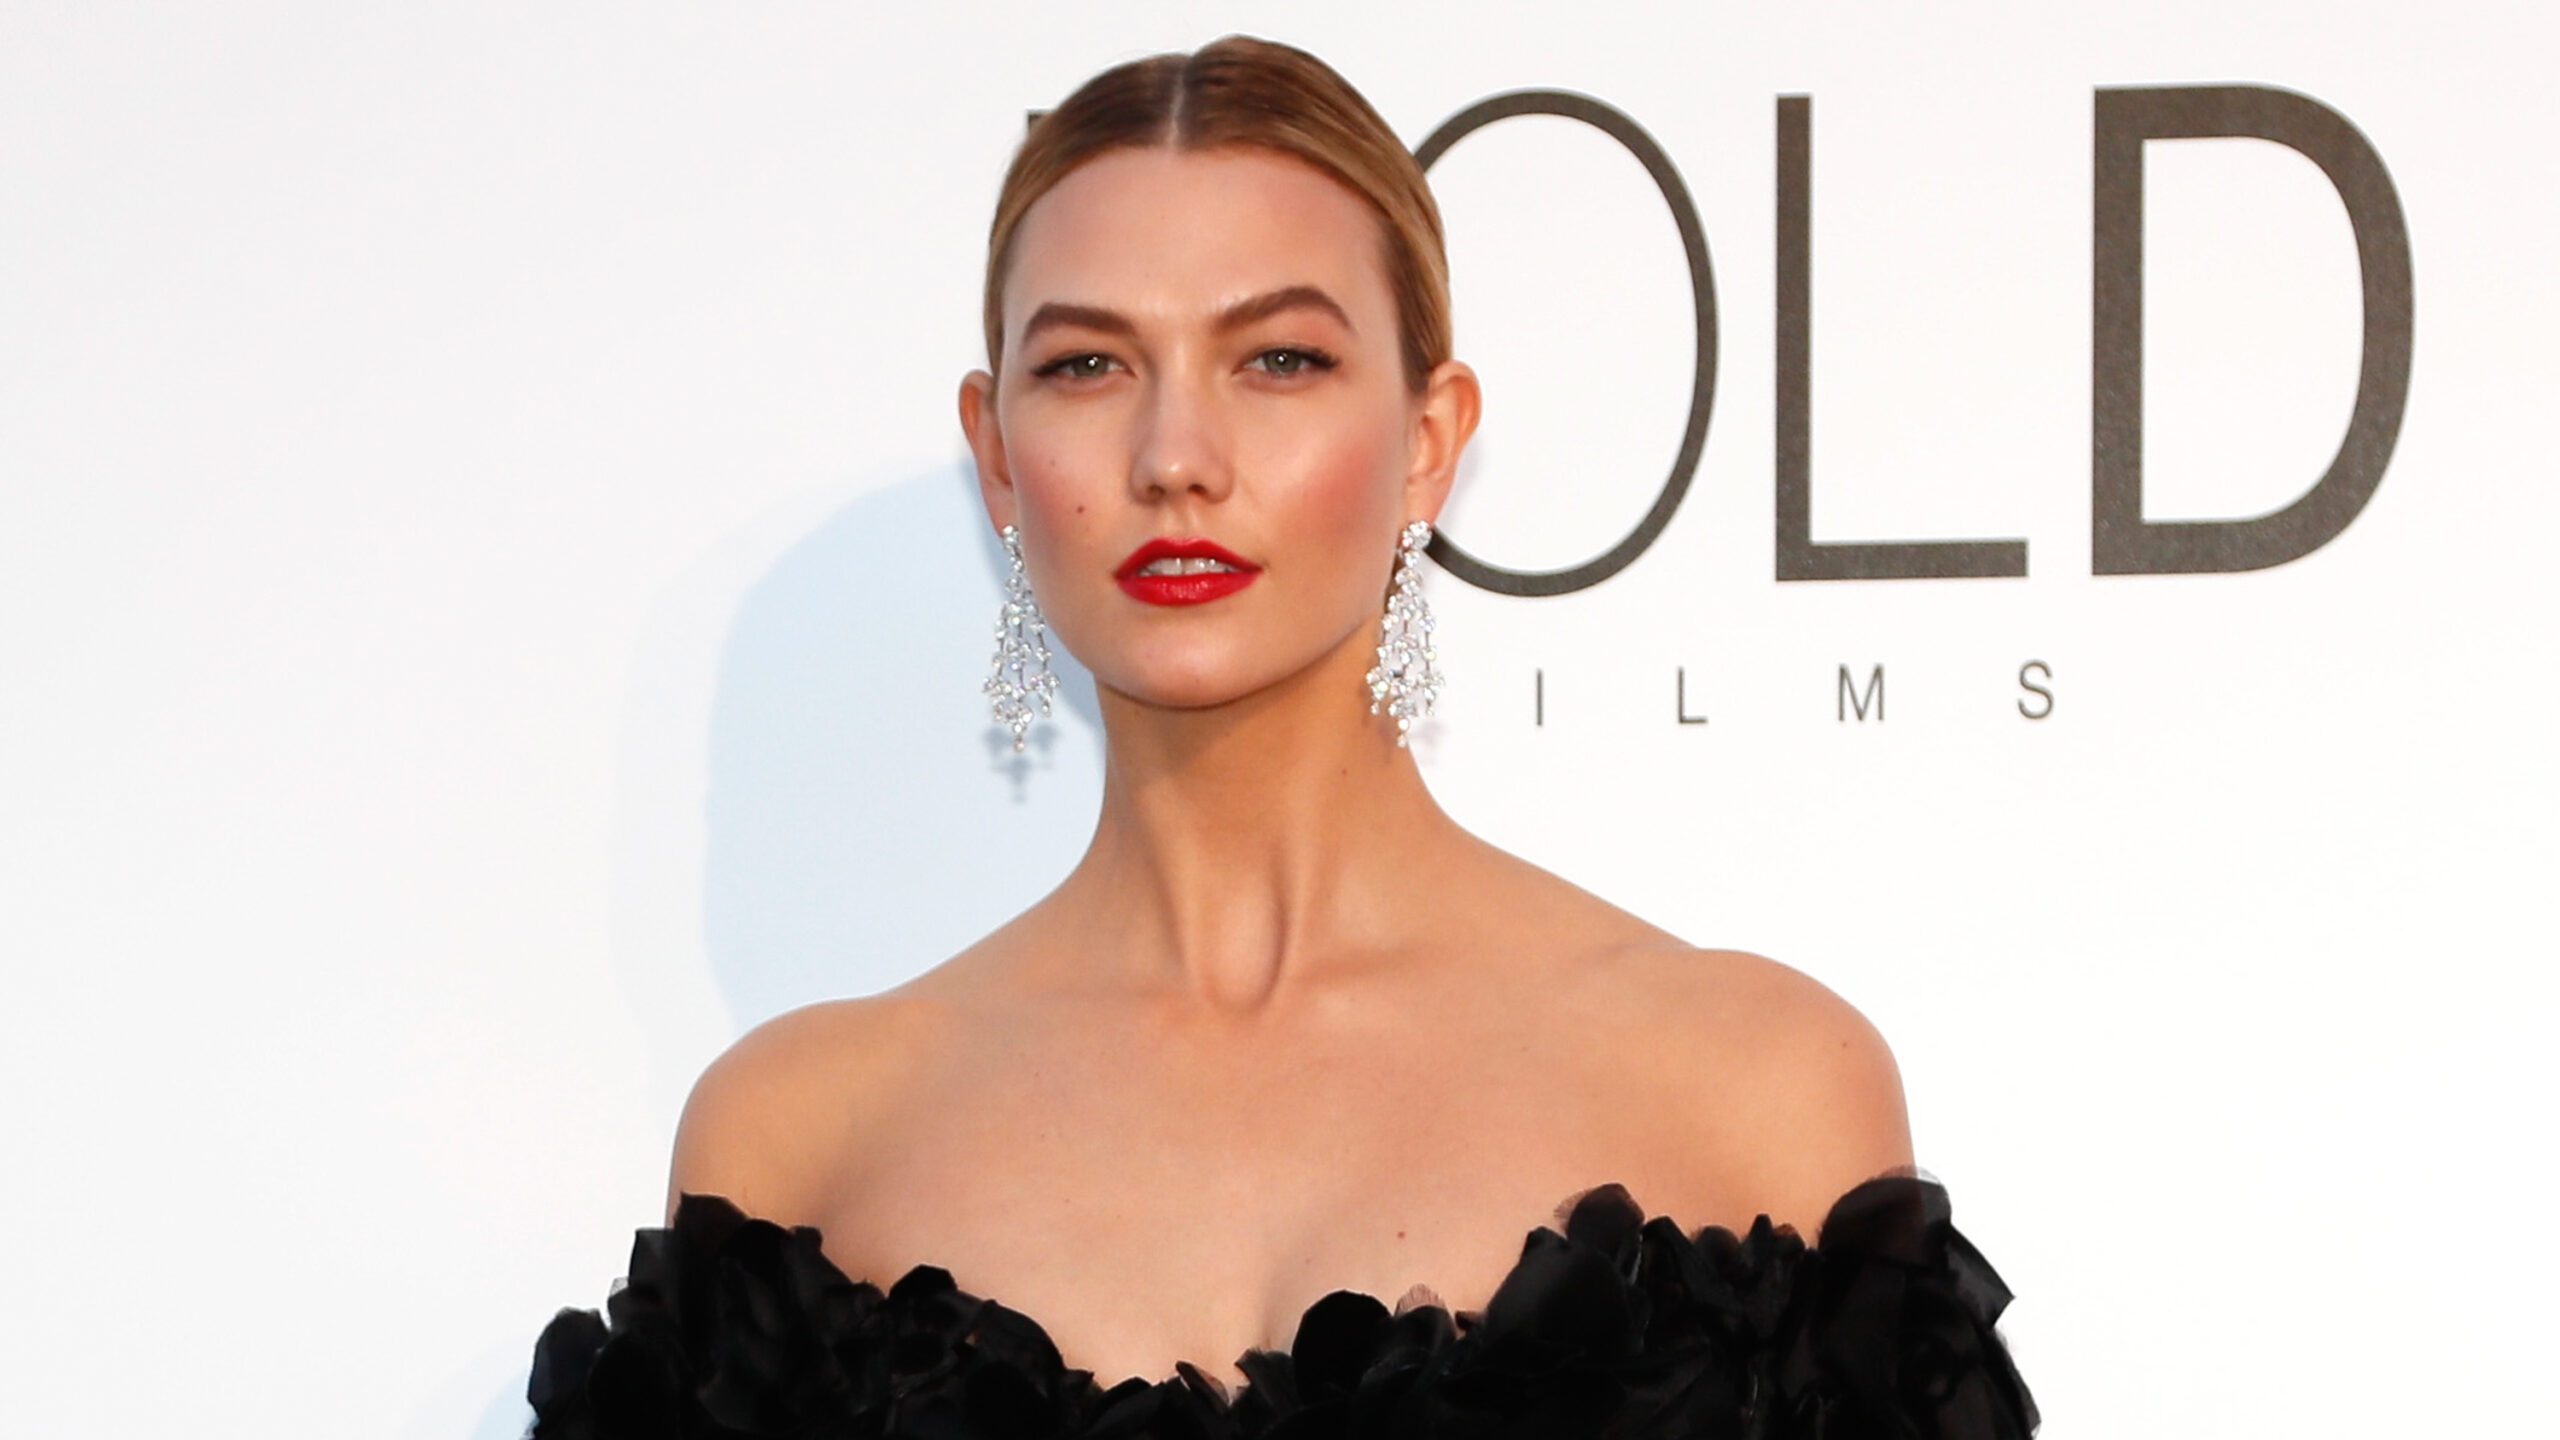 Philippine Airlines responds to Karlie Kloss’ complaint